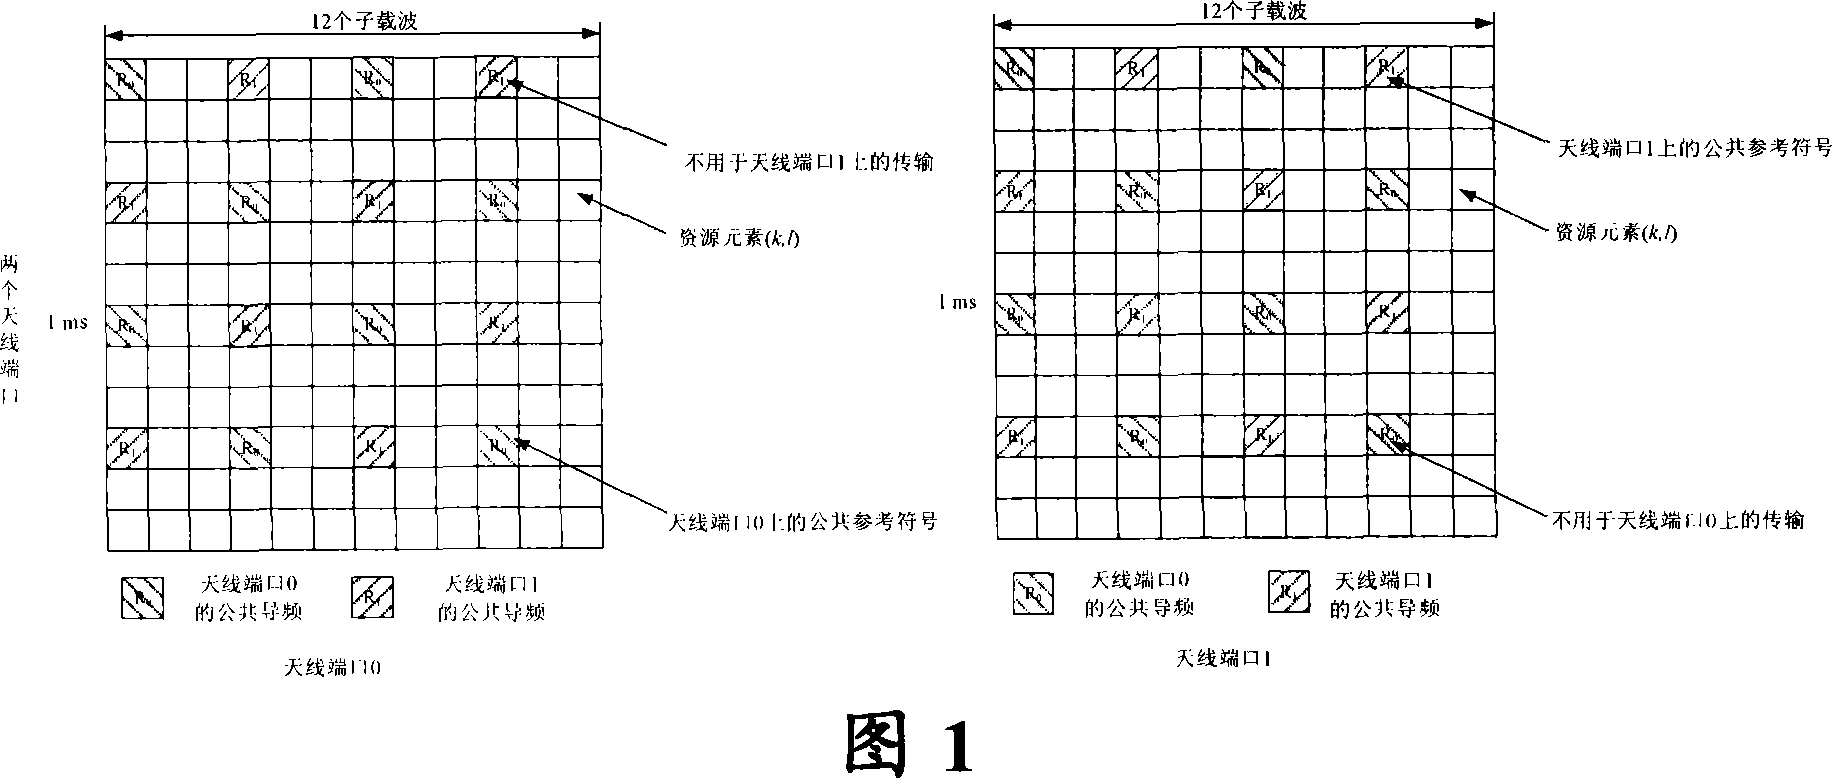 Mapping method for special downlink pilot frequency and physical resource block